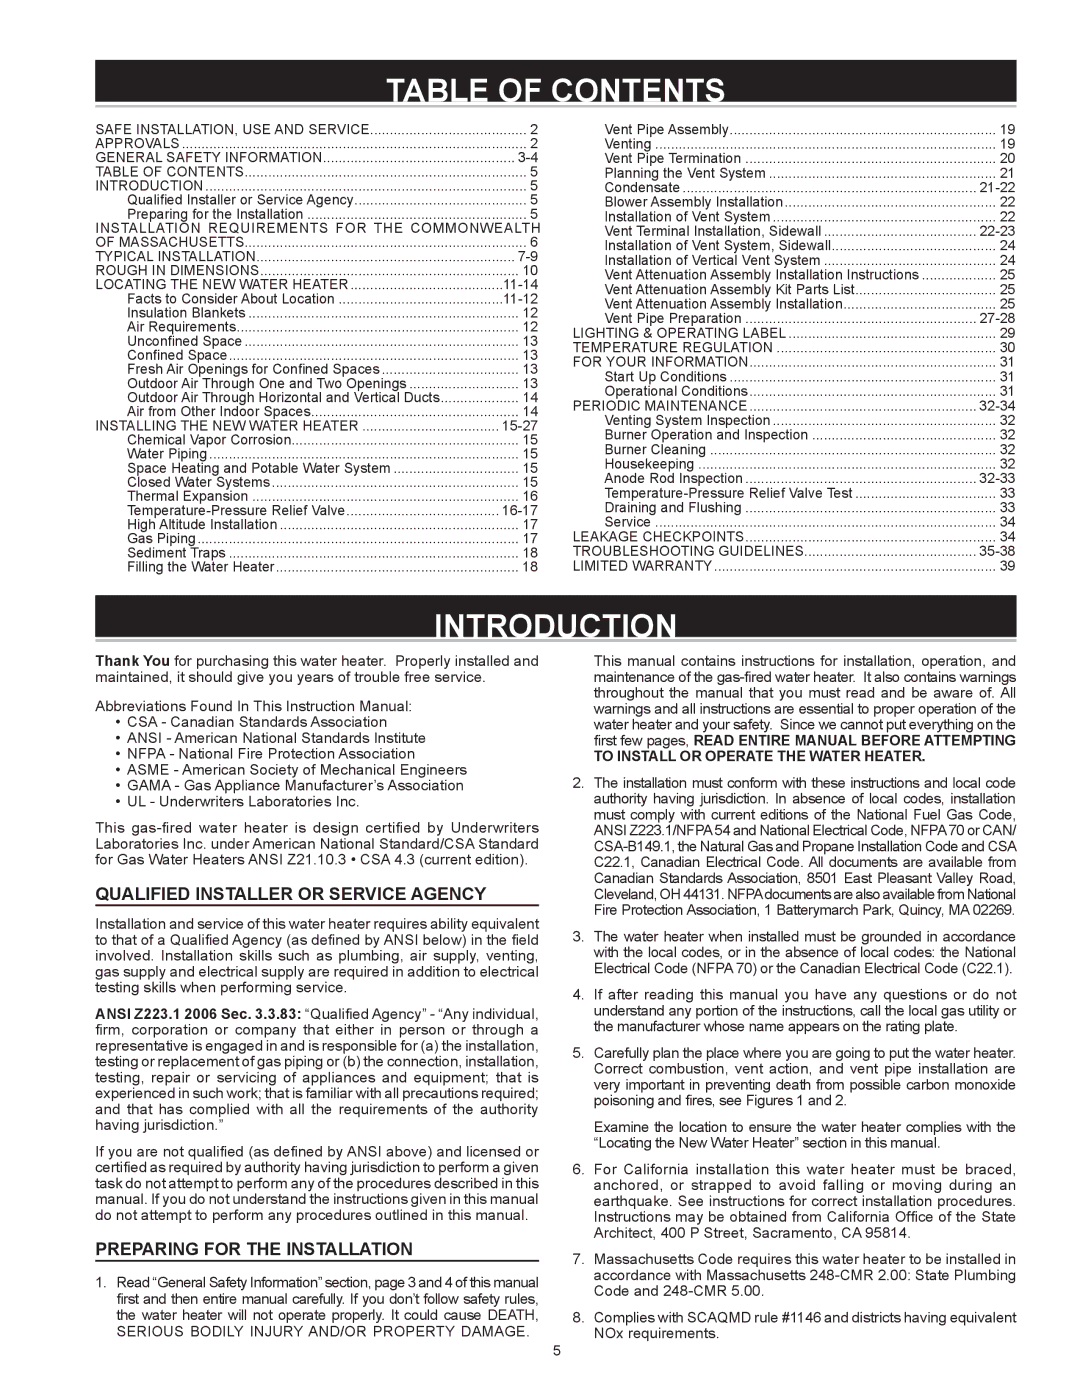 State Industries SHE 50 76N instruction manual Table of Contents, Introduction 